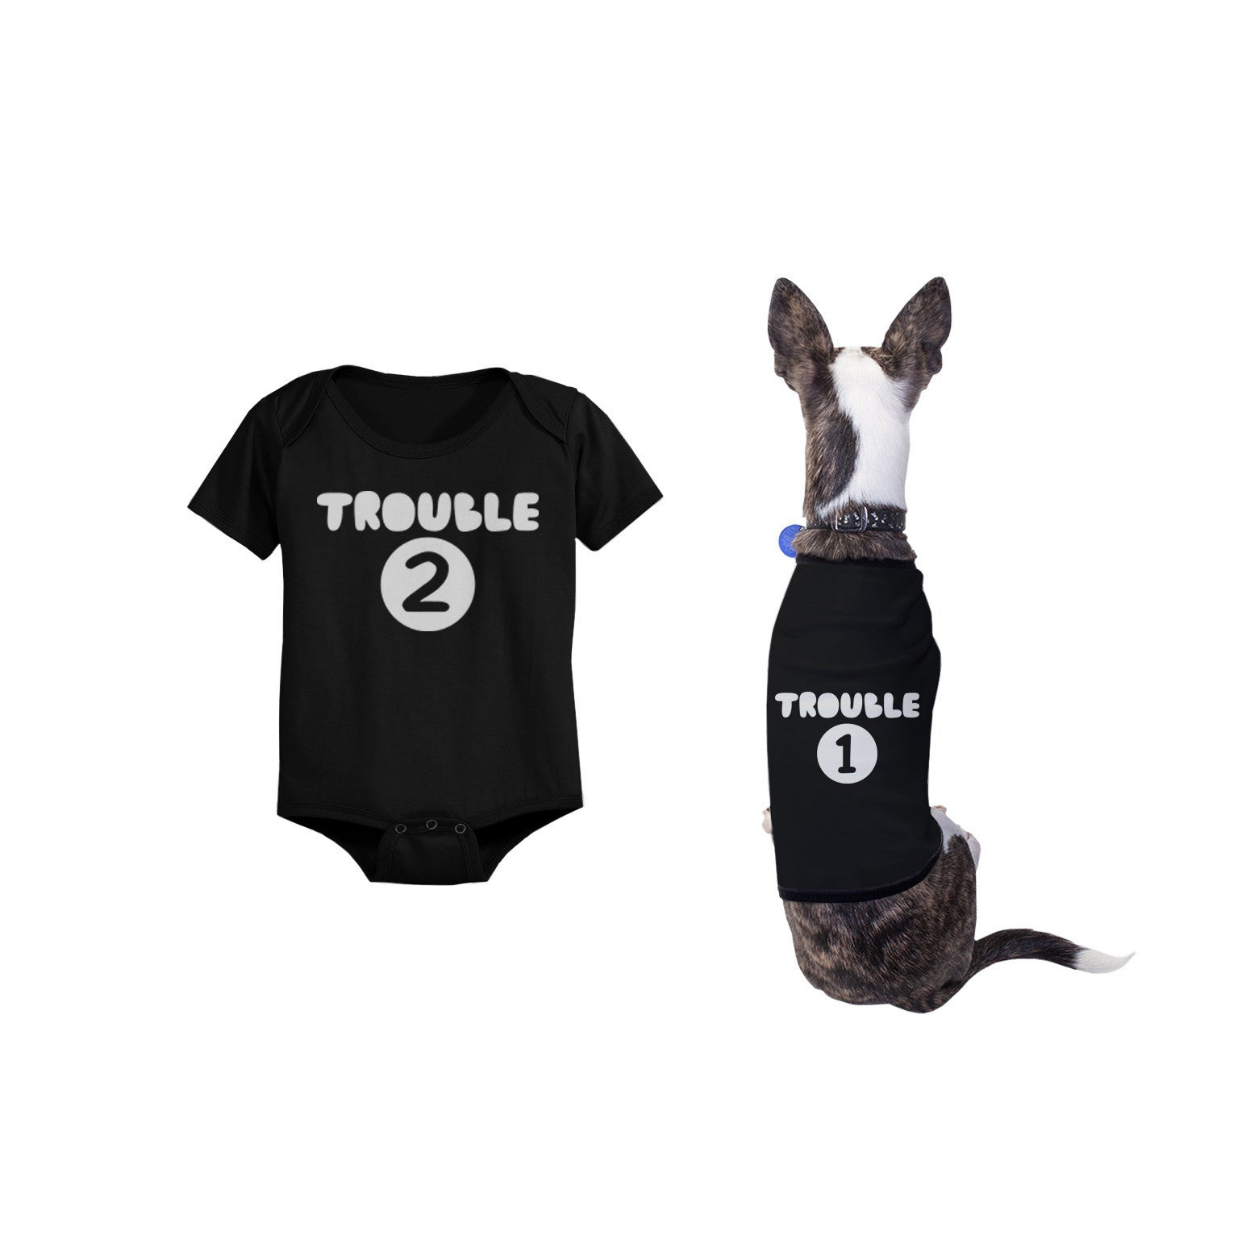 Trouble 1 Pet Shirts And Trouble 2 Baby Bodysuits Matching Dog And Infant Apparel - 365 In Love